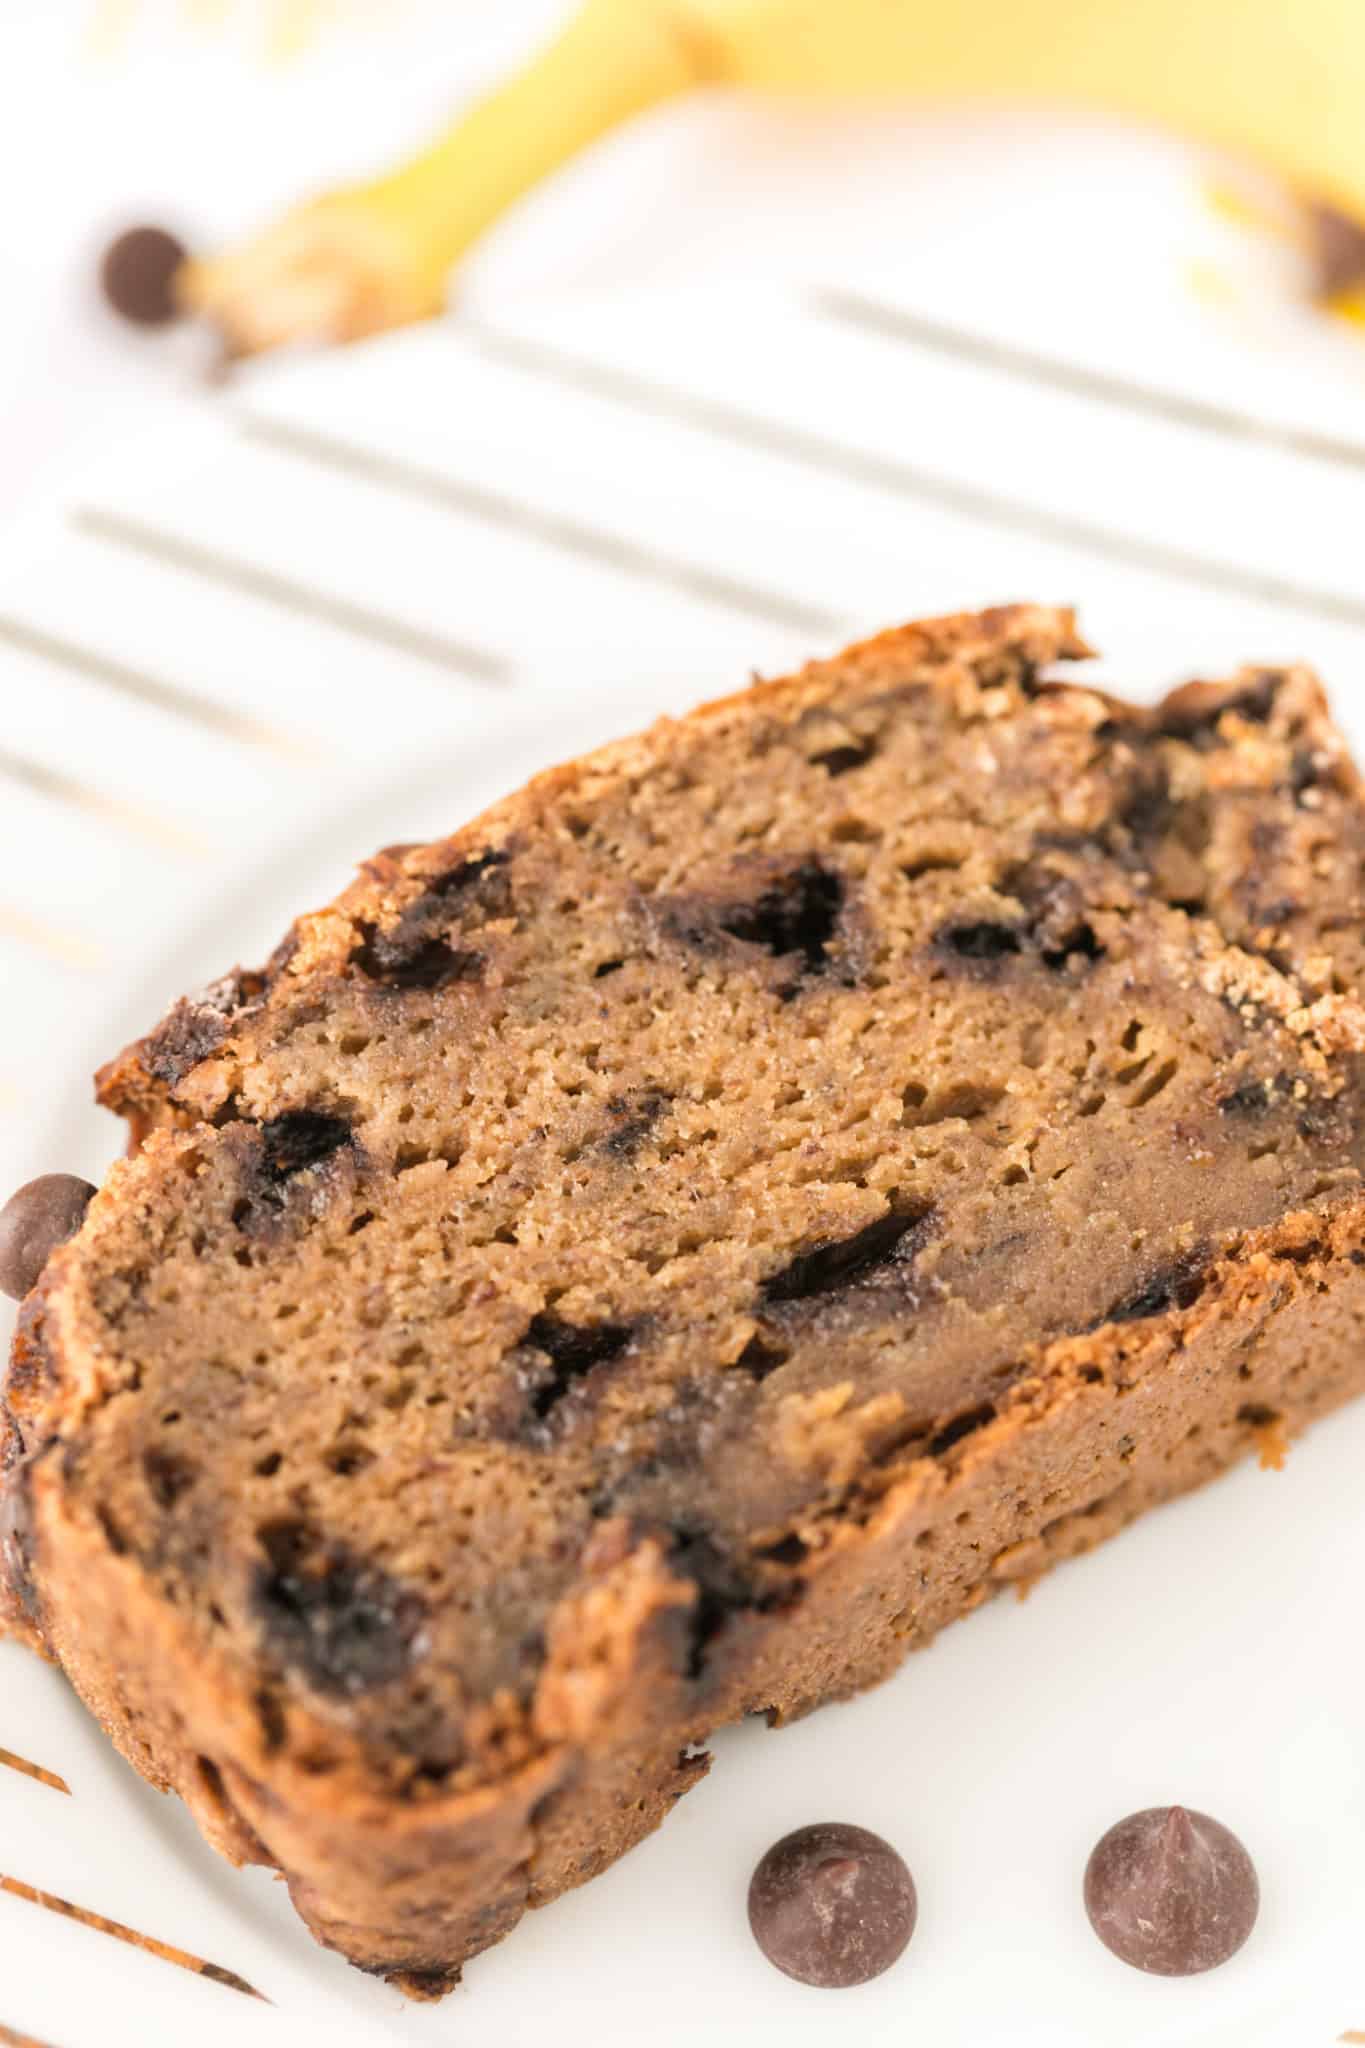 slice of banana bread with chocolate chips.